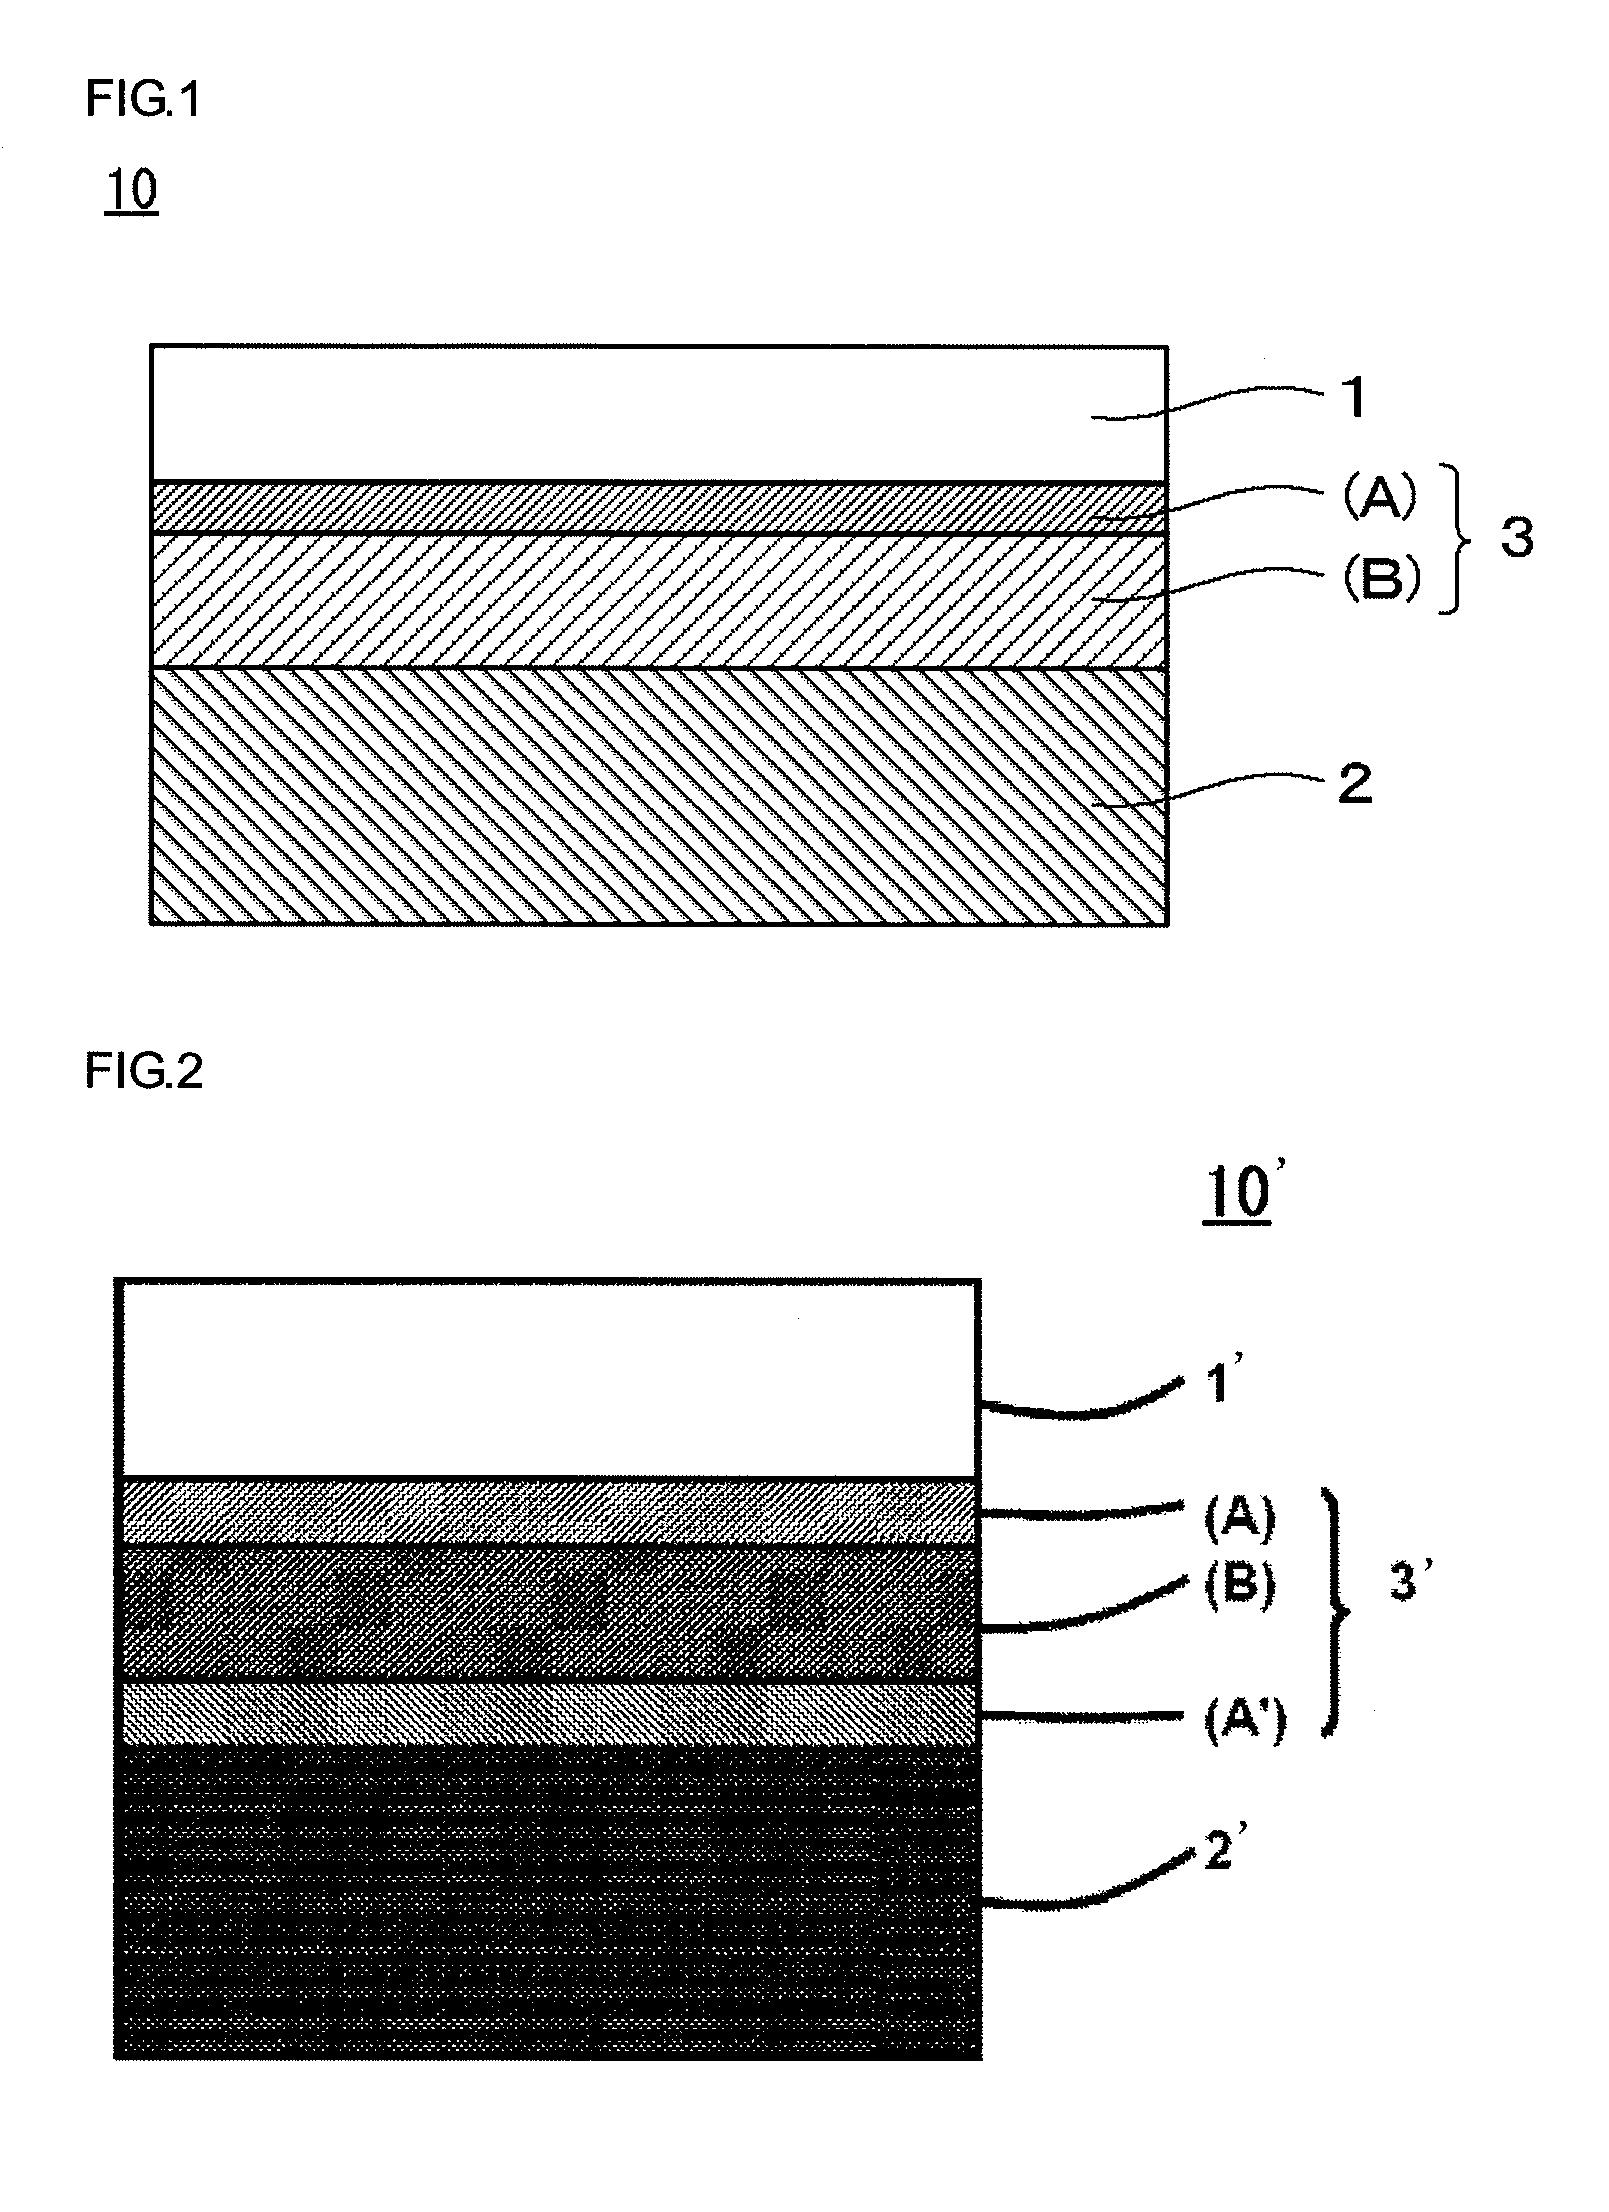 Wafer process body, wafer processing member, wafer processing temporary adhesive material, and method for manufacturing thin wafer